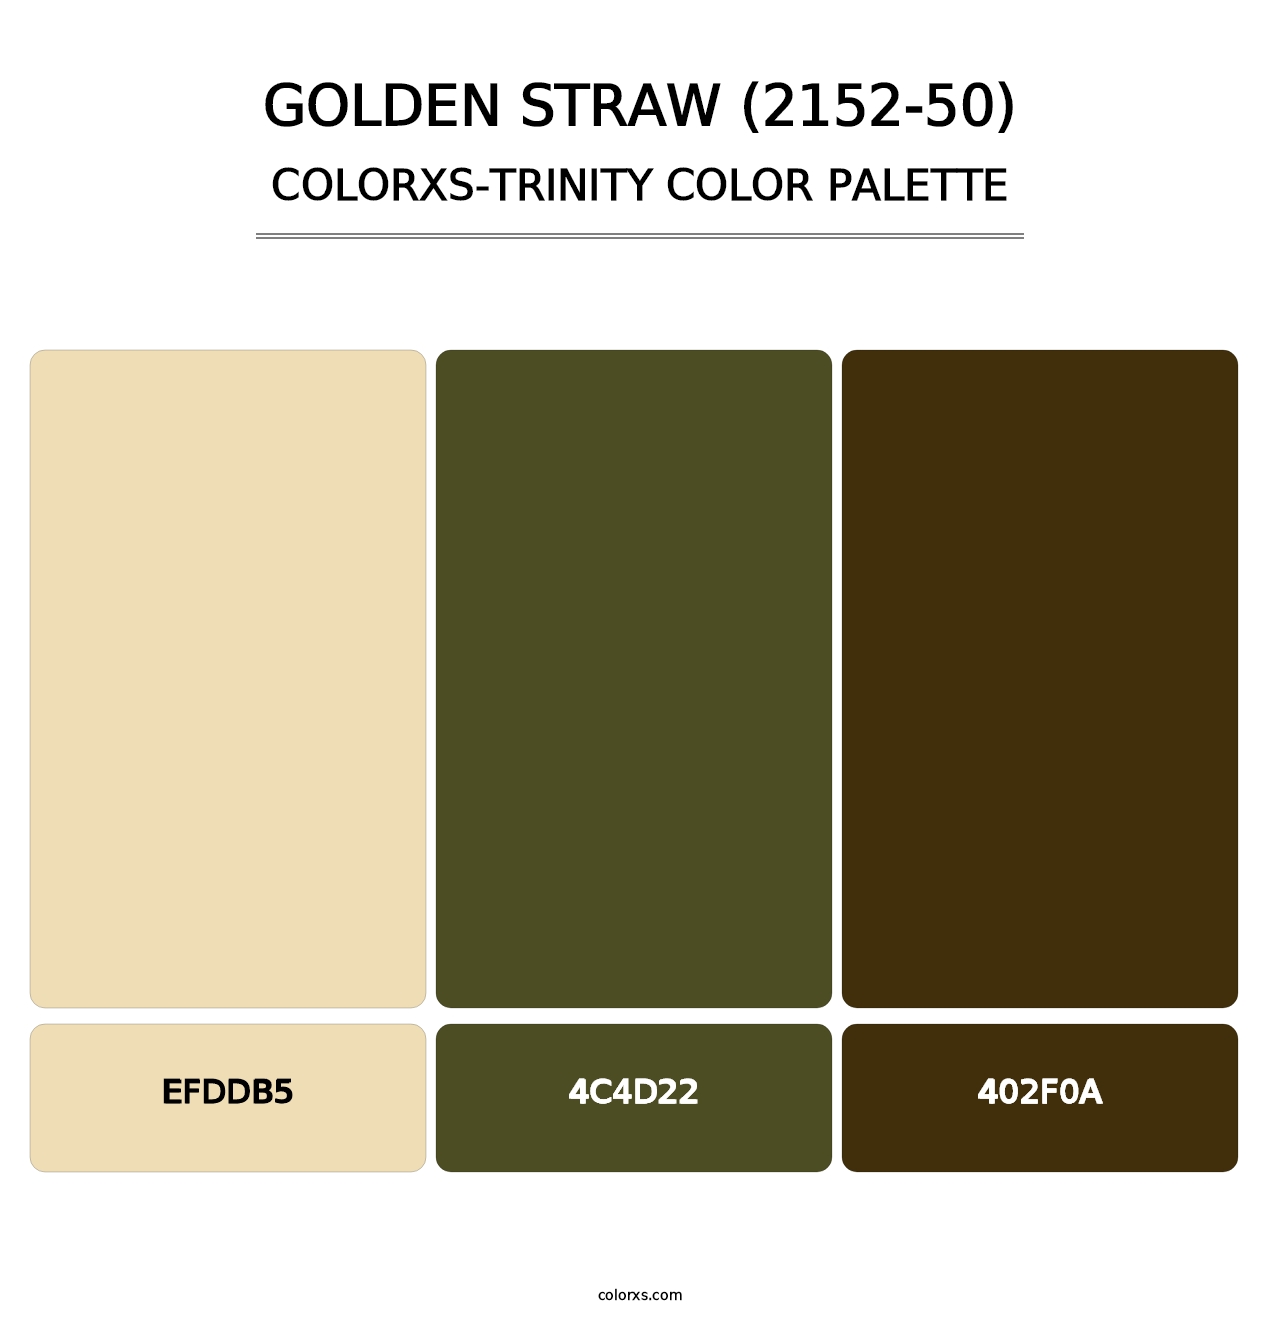 Golden Straw (2152-50) - Colorxs Trinity Palette